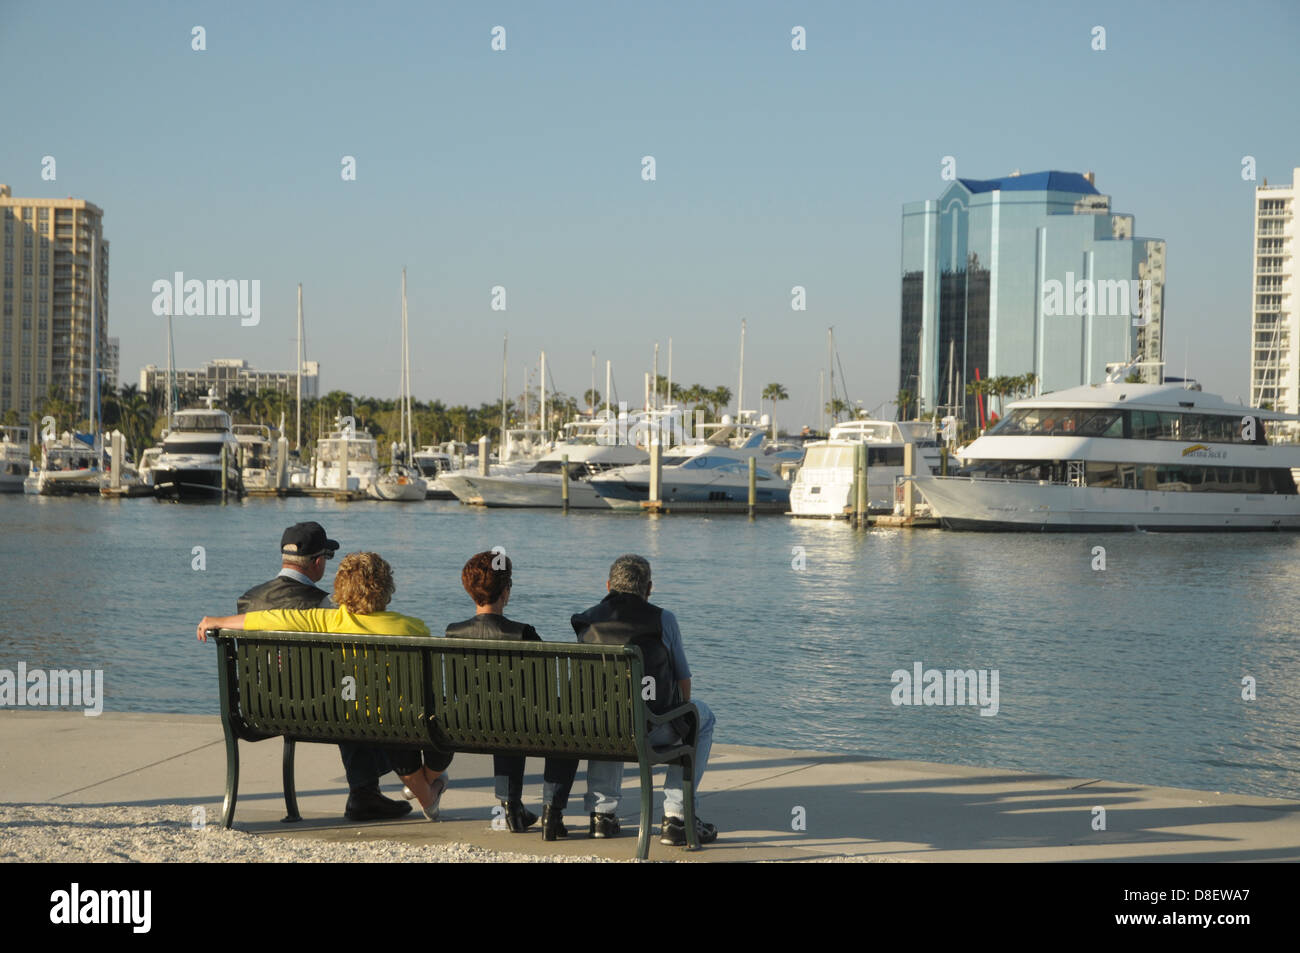 A group of people sit on a bench at the Sarasota, Florida waterfront. Stock Photo